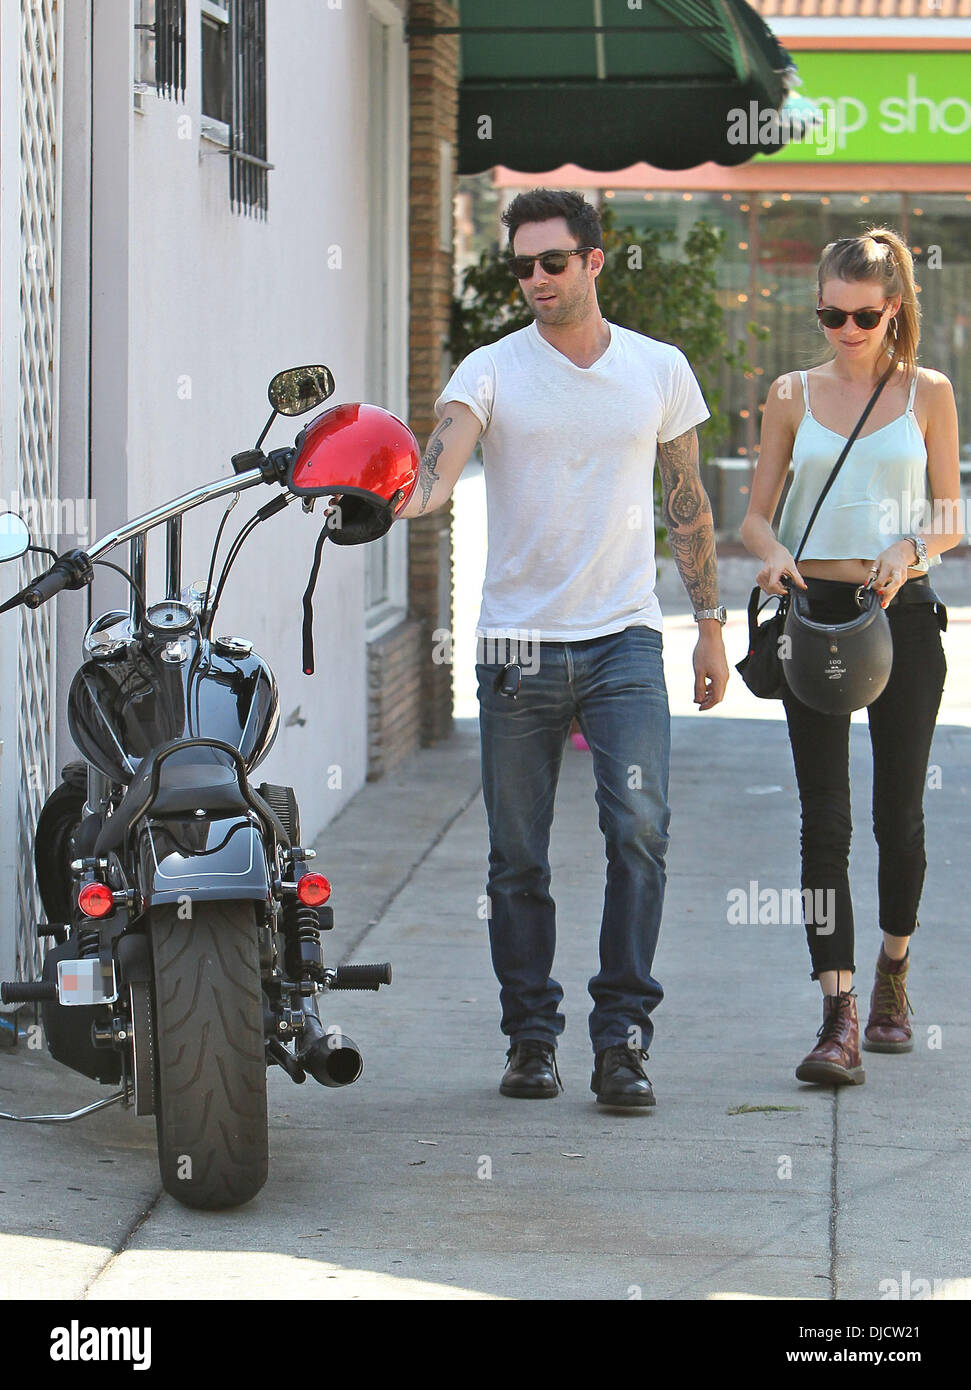 Adam Levine and girlfriend Behati Prinsloo returns to his parked motorcycle  after having lunch at Mustard Seed Cafe in Los Feliz. Los Angeles,  California - 07.08.12 Featuring: Adam Levine and girlfriend Behati